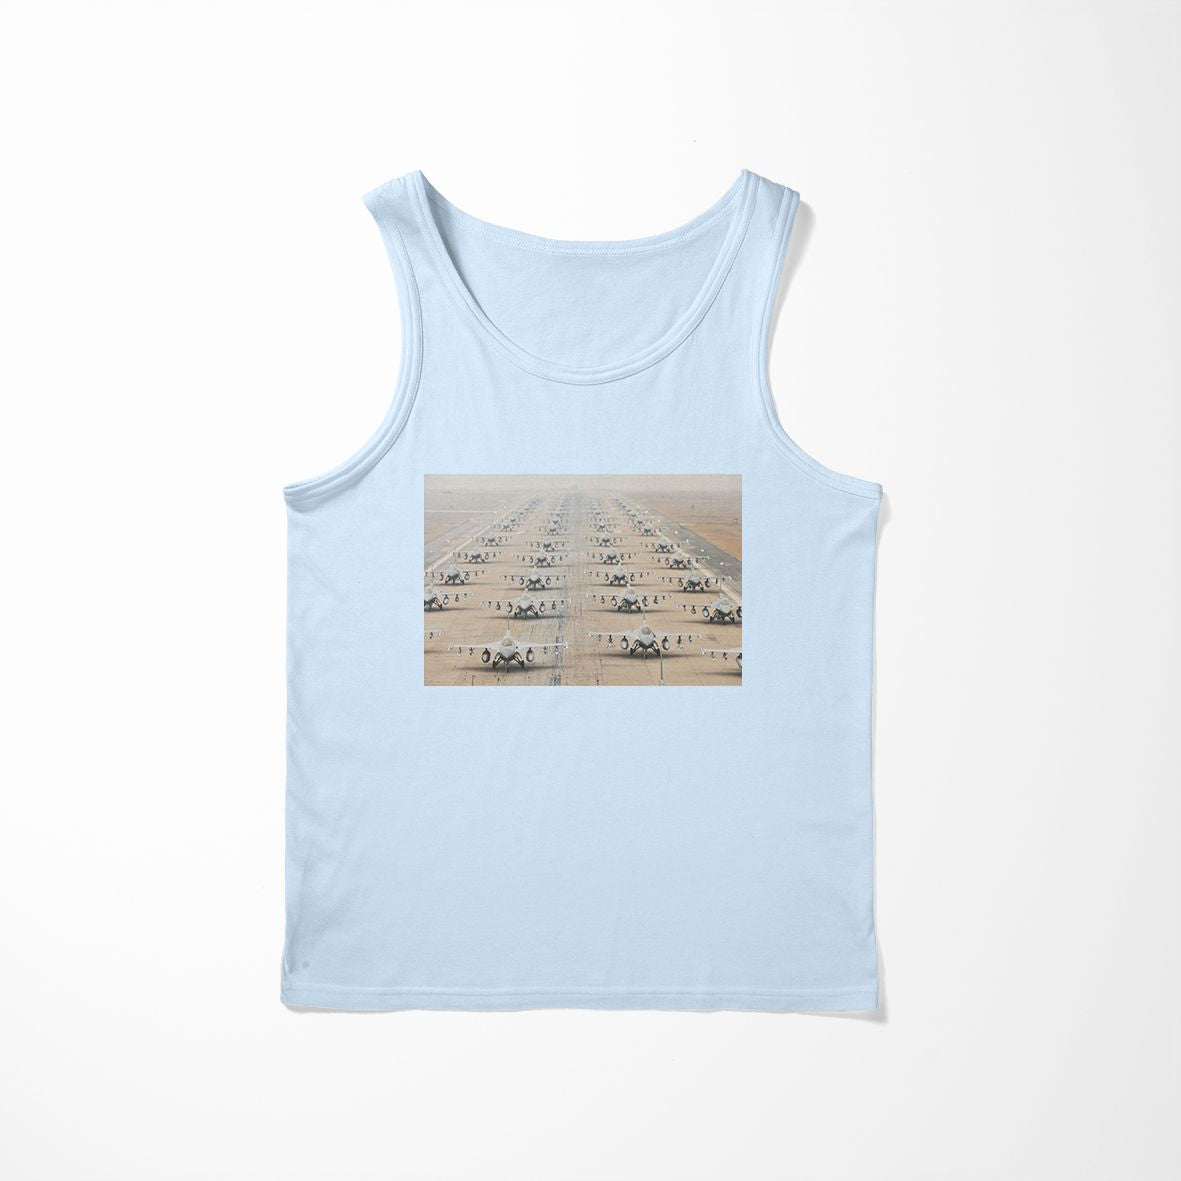 Military Jets Designed Tank Tops